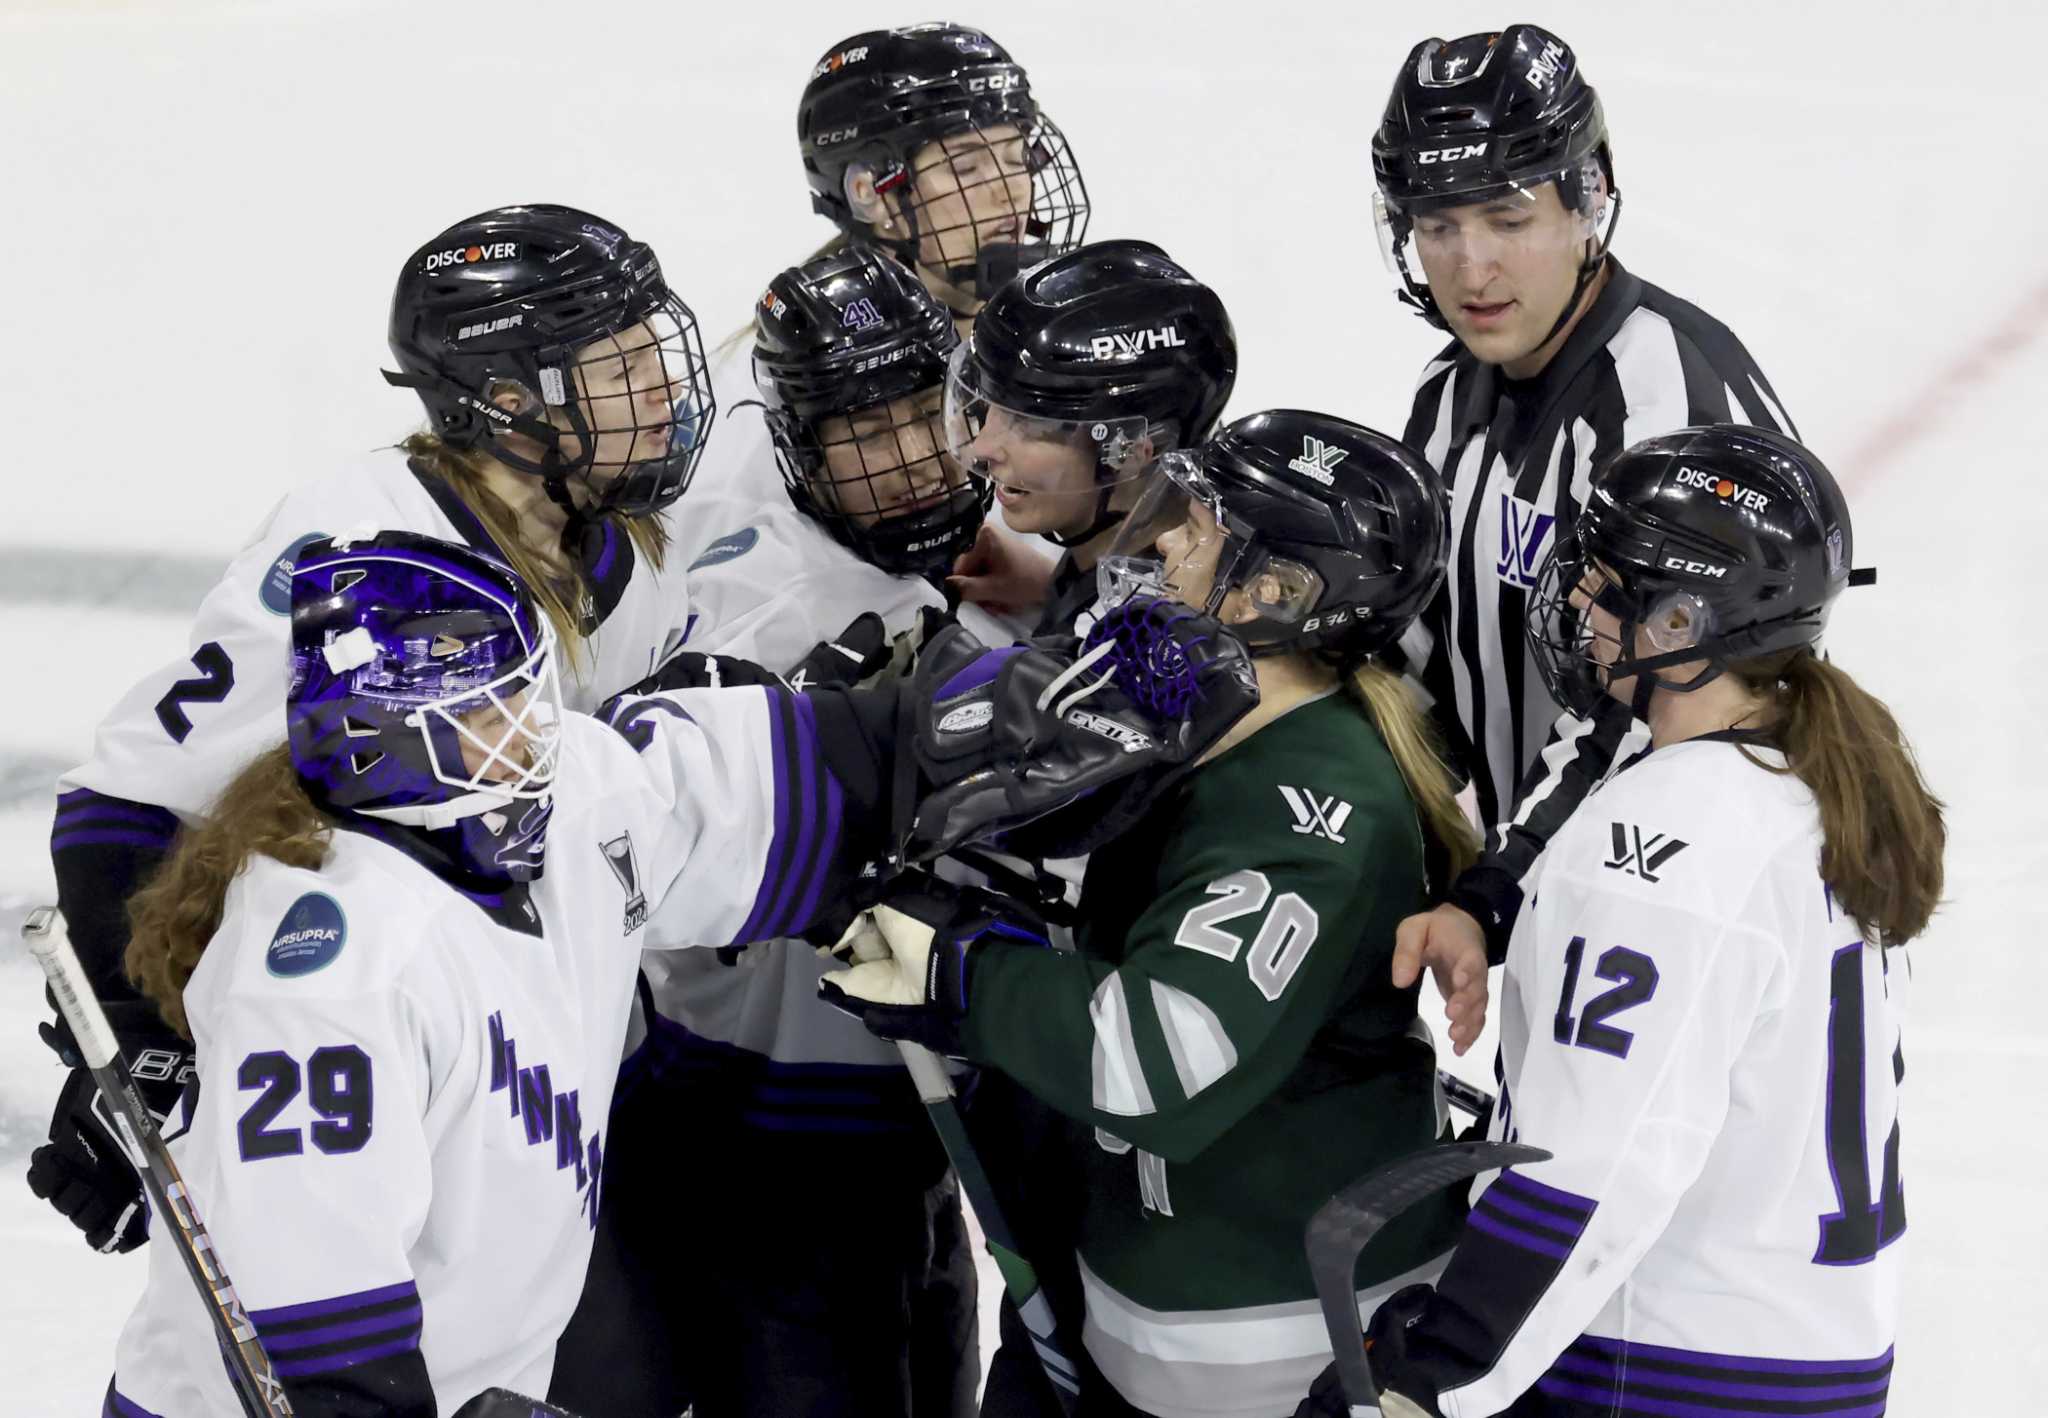 Pro Women's Hockey League season deemed a success, though challenges remain entering Year 2